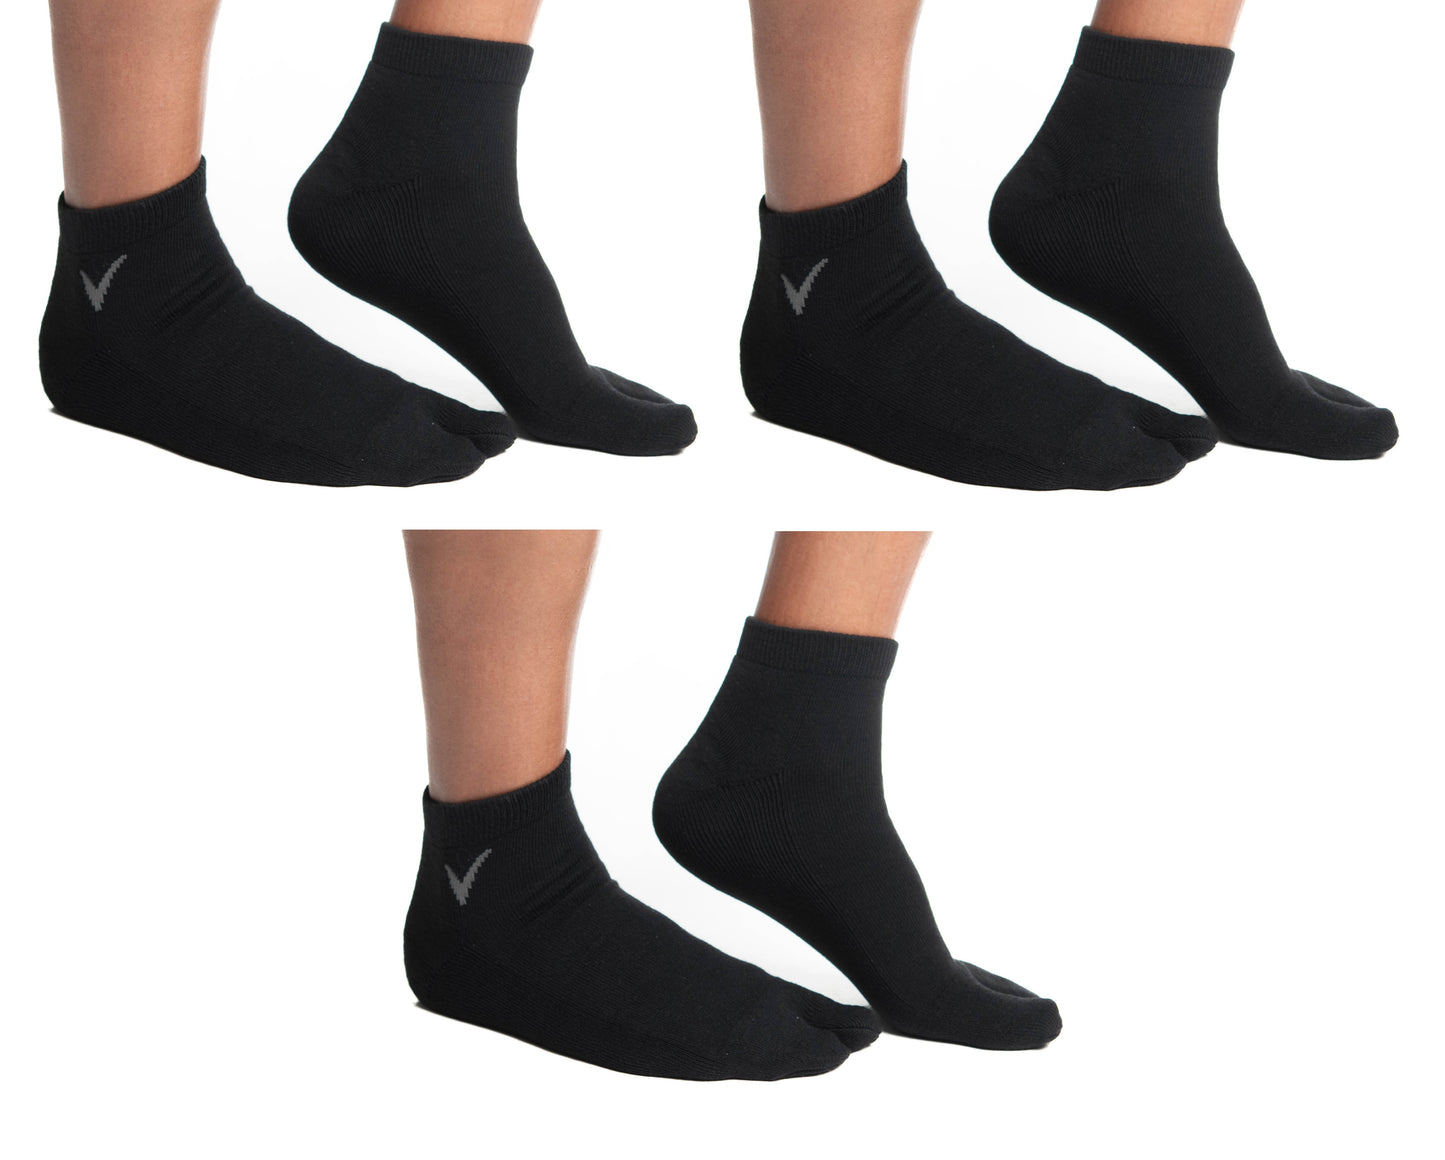 V-Toe Flip-Flop Socks Ankle Tabi 3 Pairs Thicker Comfy Warm Styles Athletic or Casulal